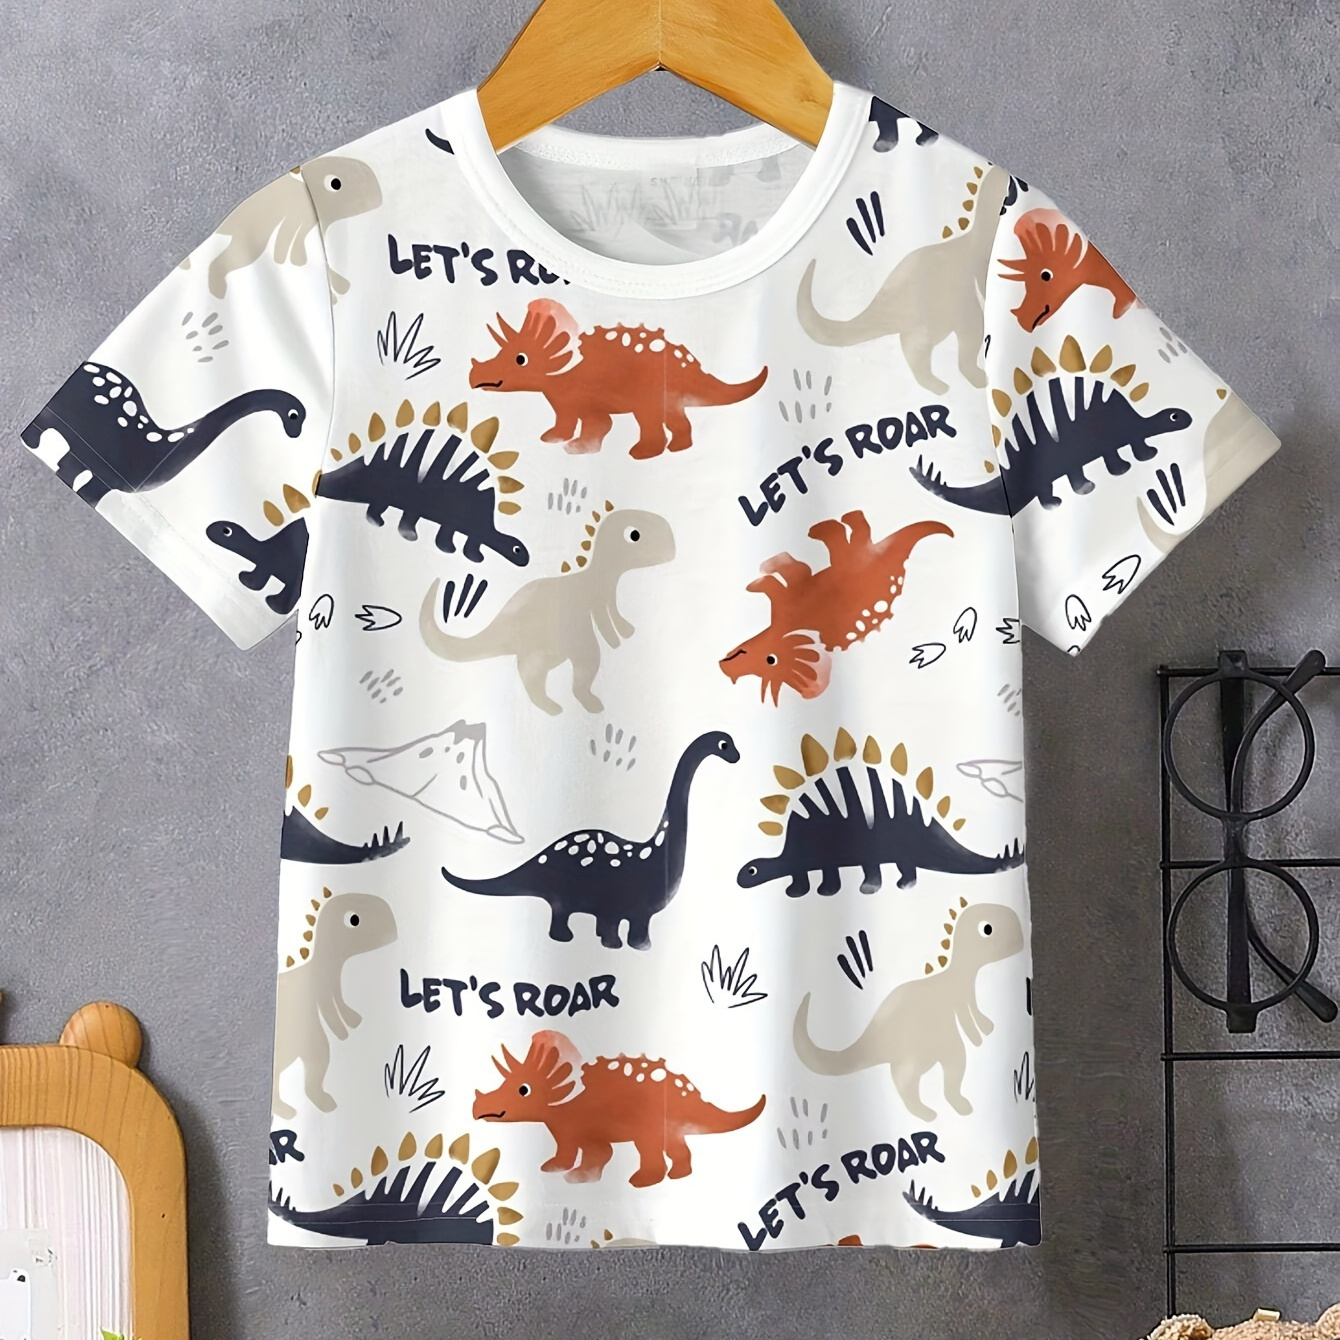 

Casual Colorful Dinosaur Full Print T-shirt - Vibrant Short Sleeve Tee For Summer Fun - Casual Style For Boys And Girls